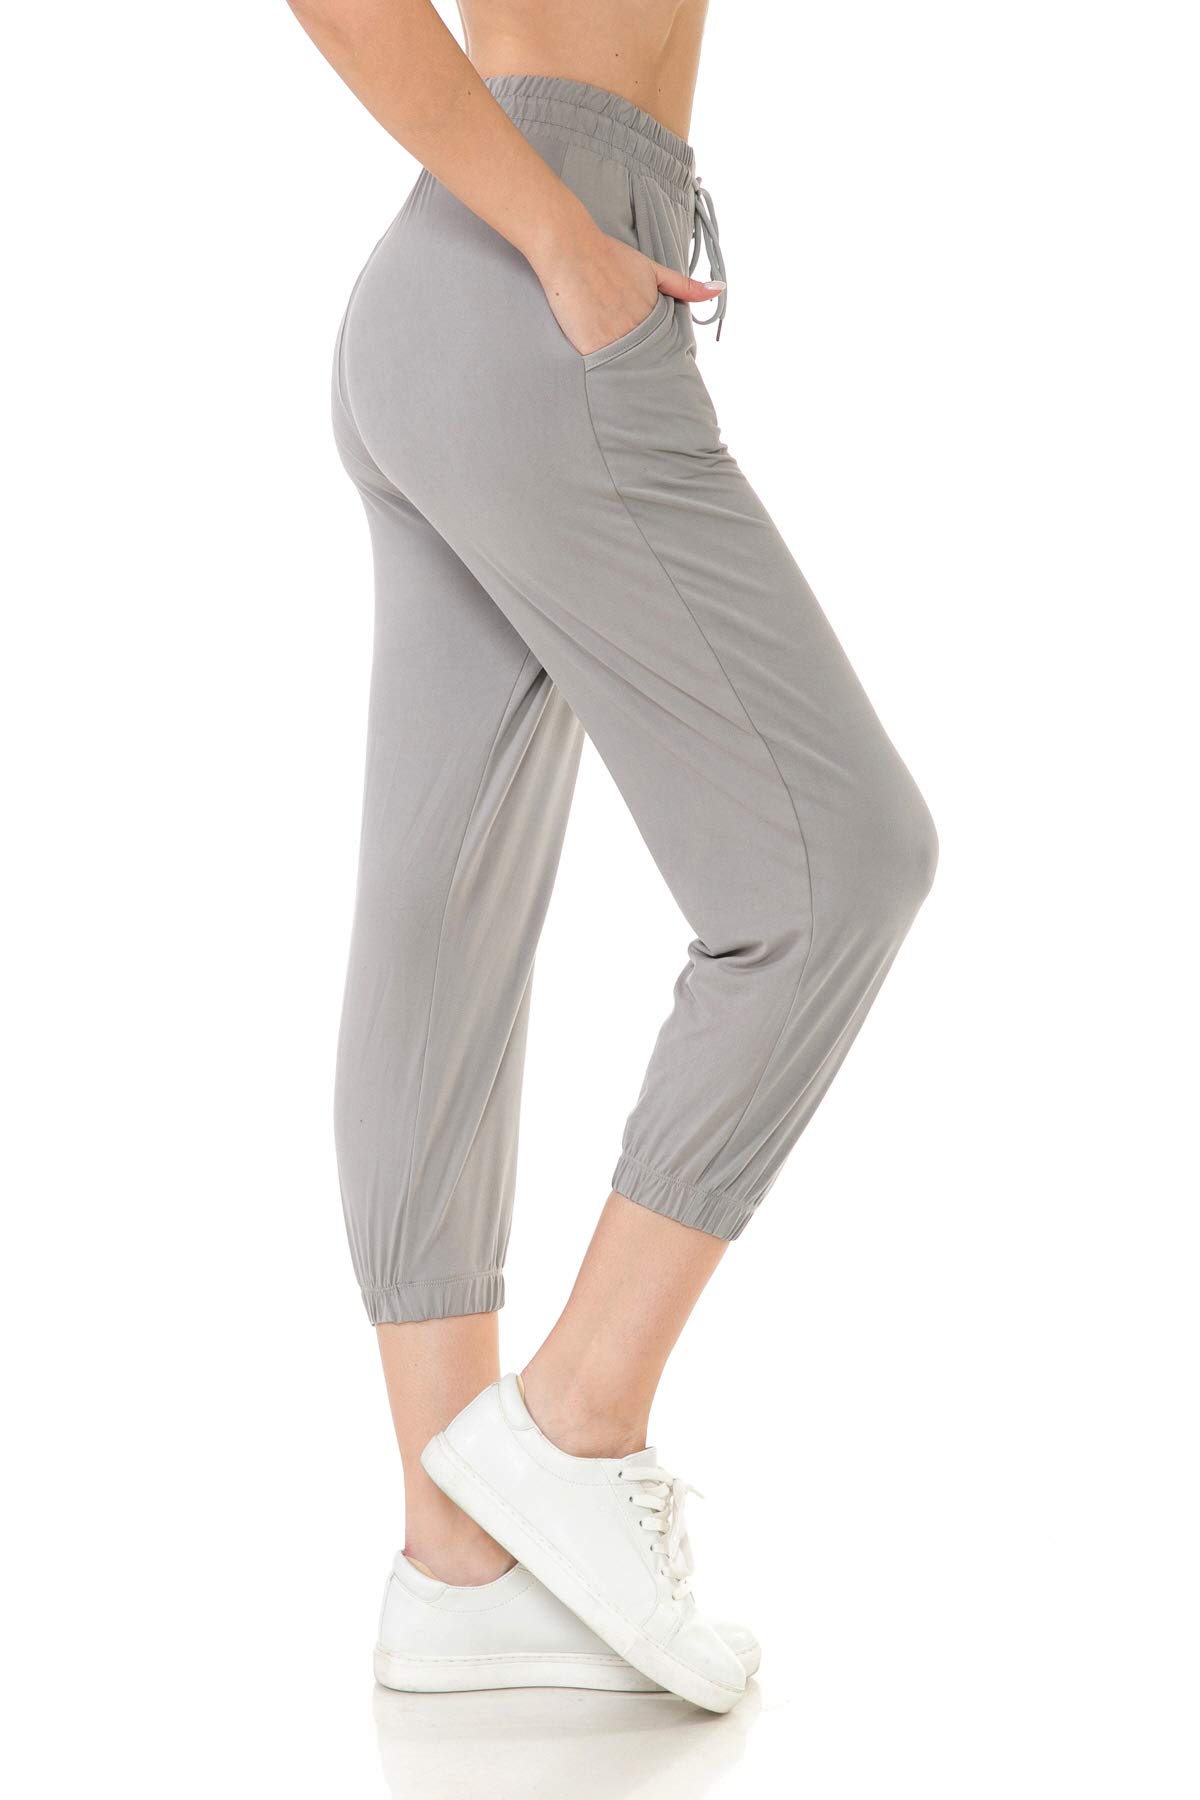 Leggings Depot Women's Relaxed-fit Jogger Track Cuff Sweatpants with  Pockets for Yoga, Workout